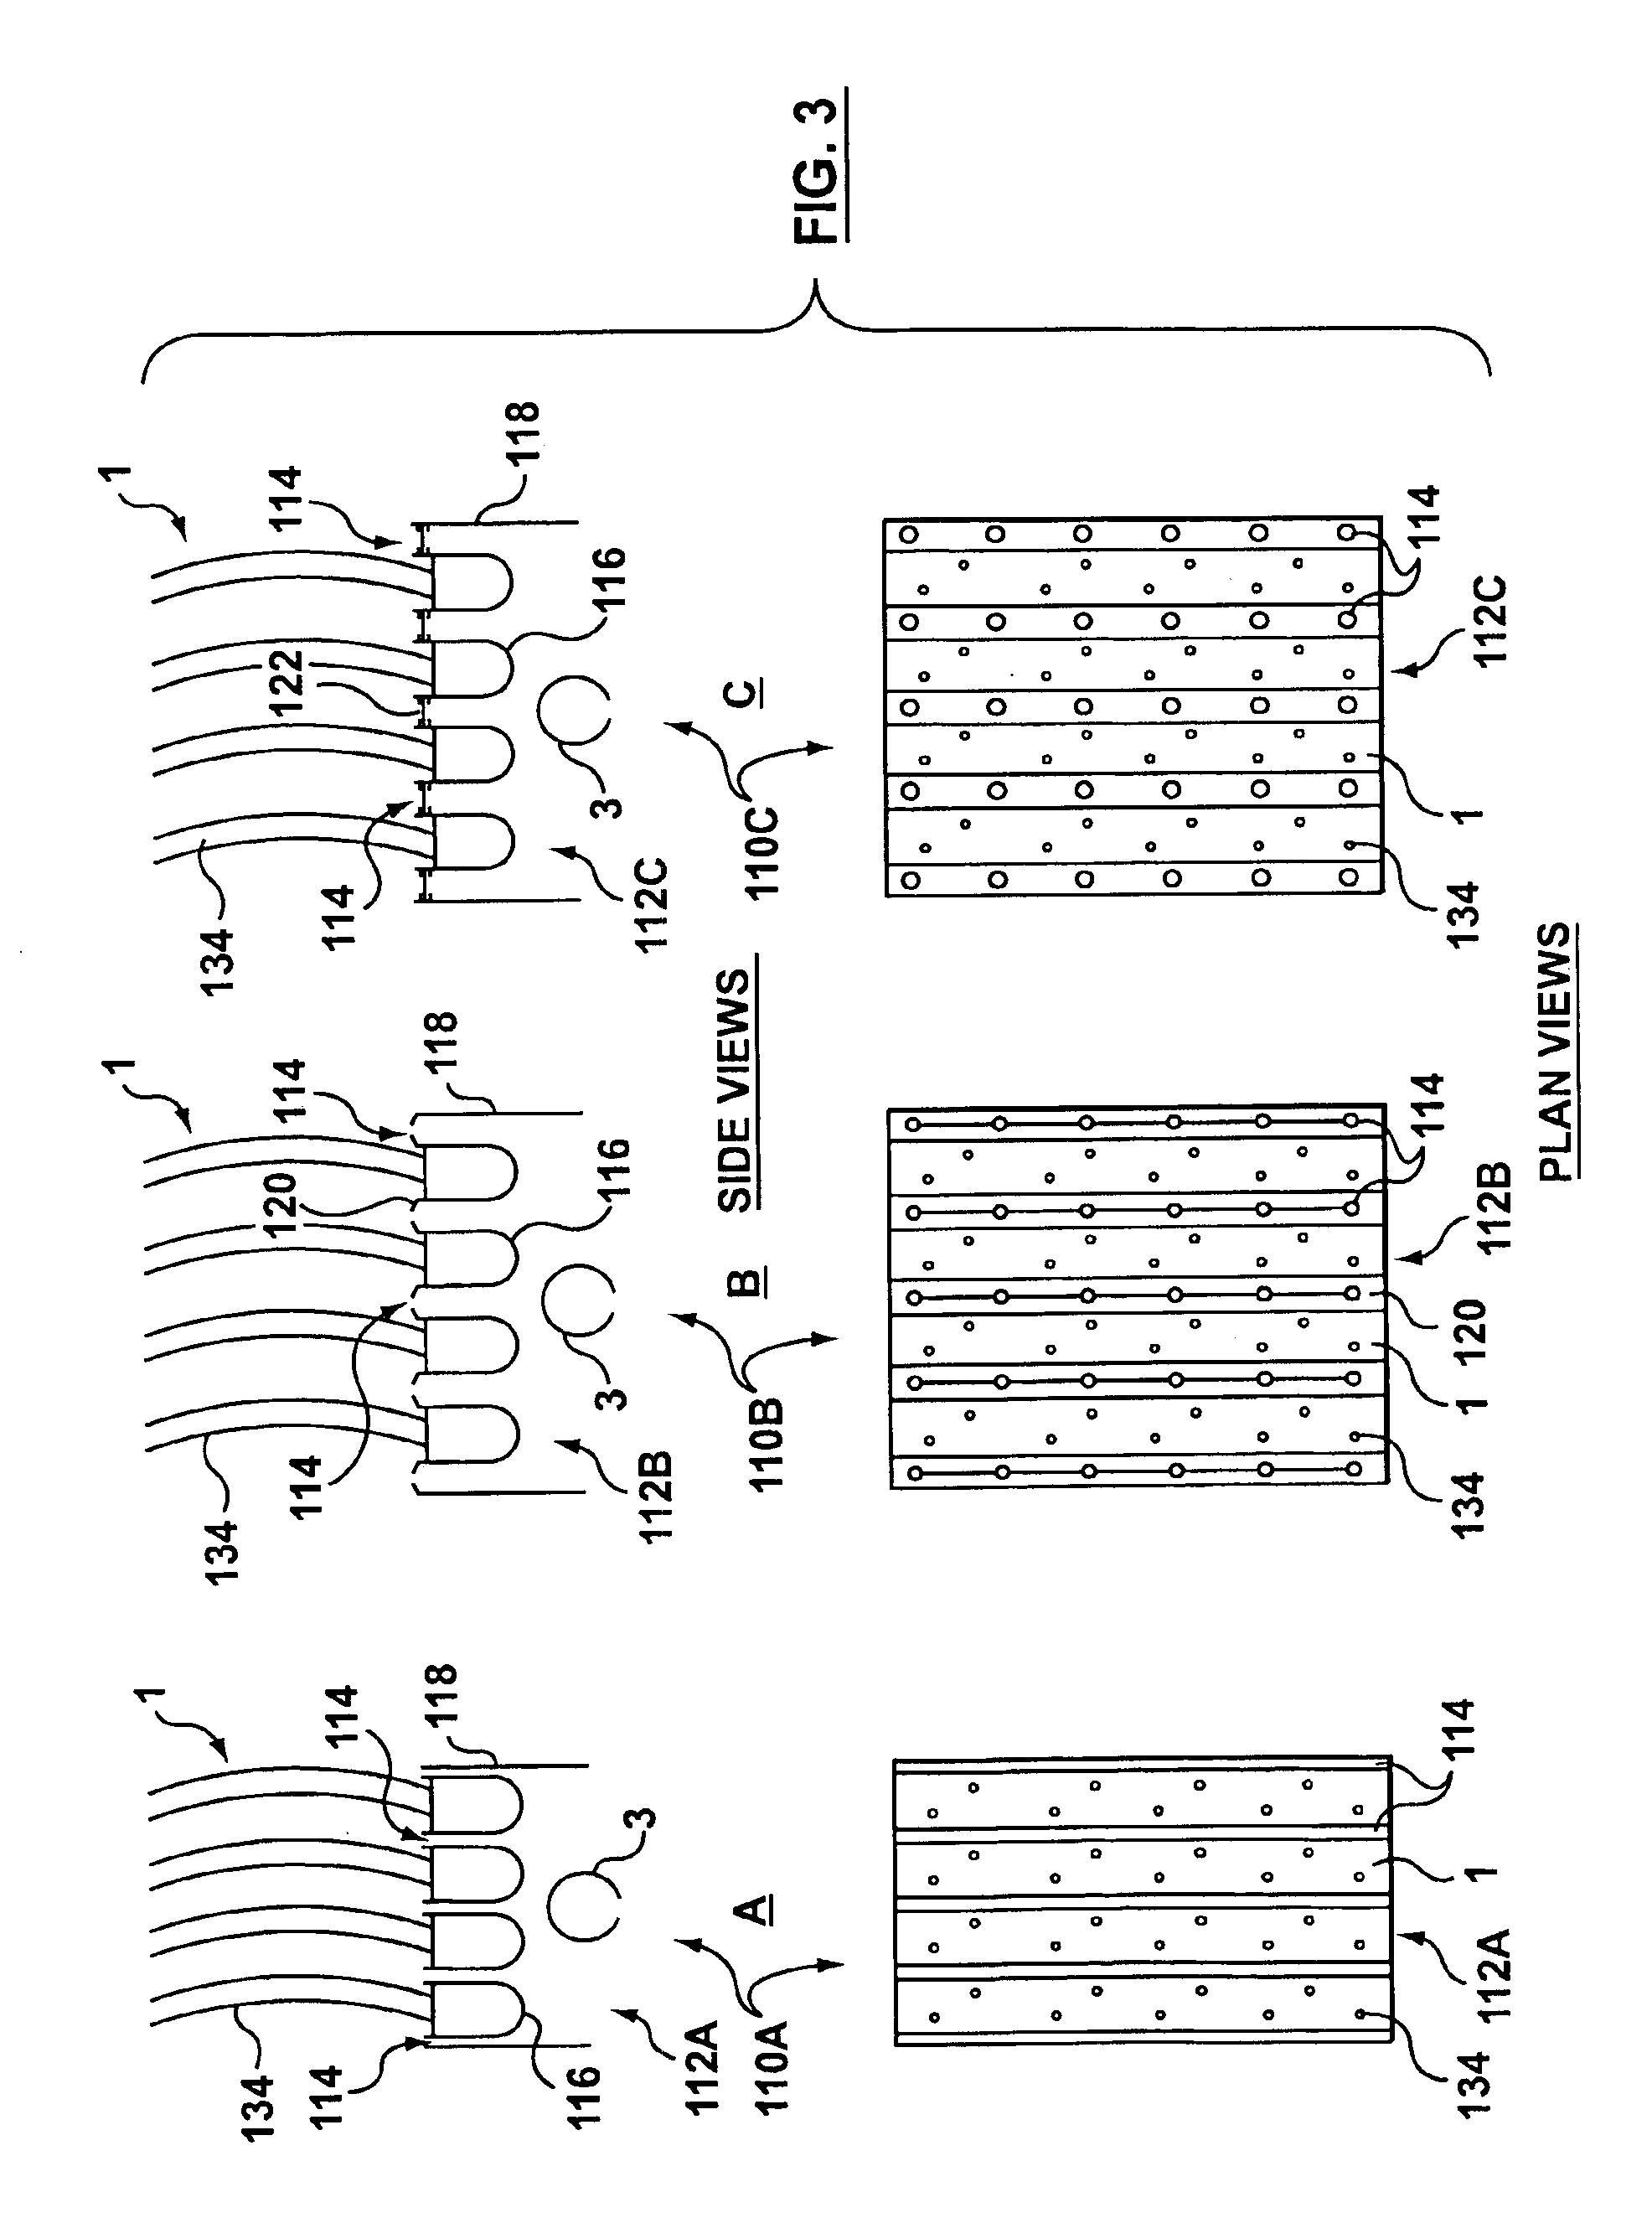 Inverted air box aerator and aeration method for immersed membrane